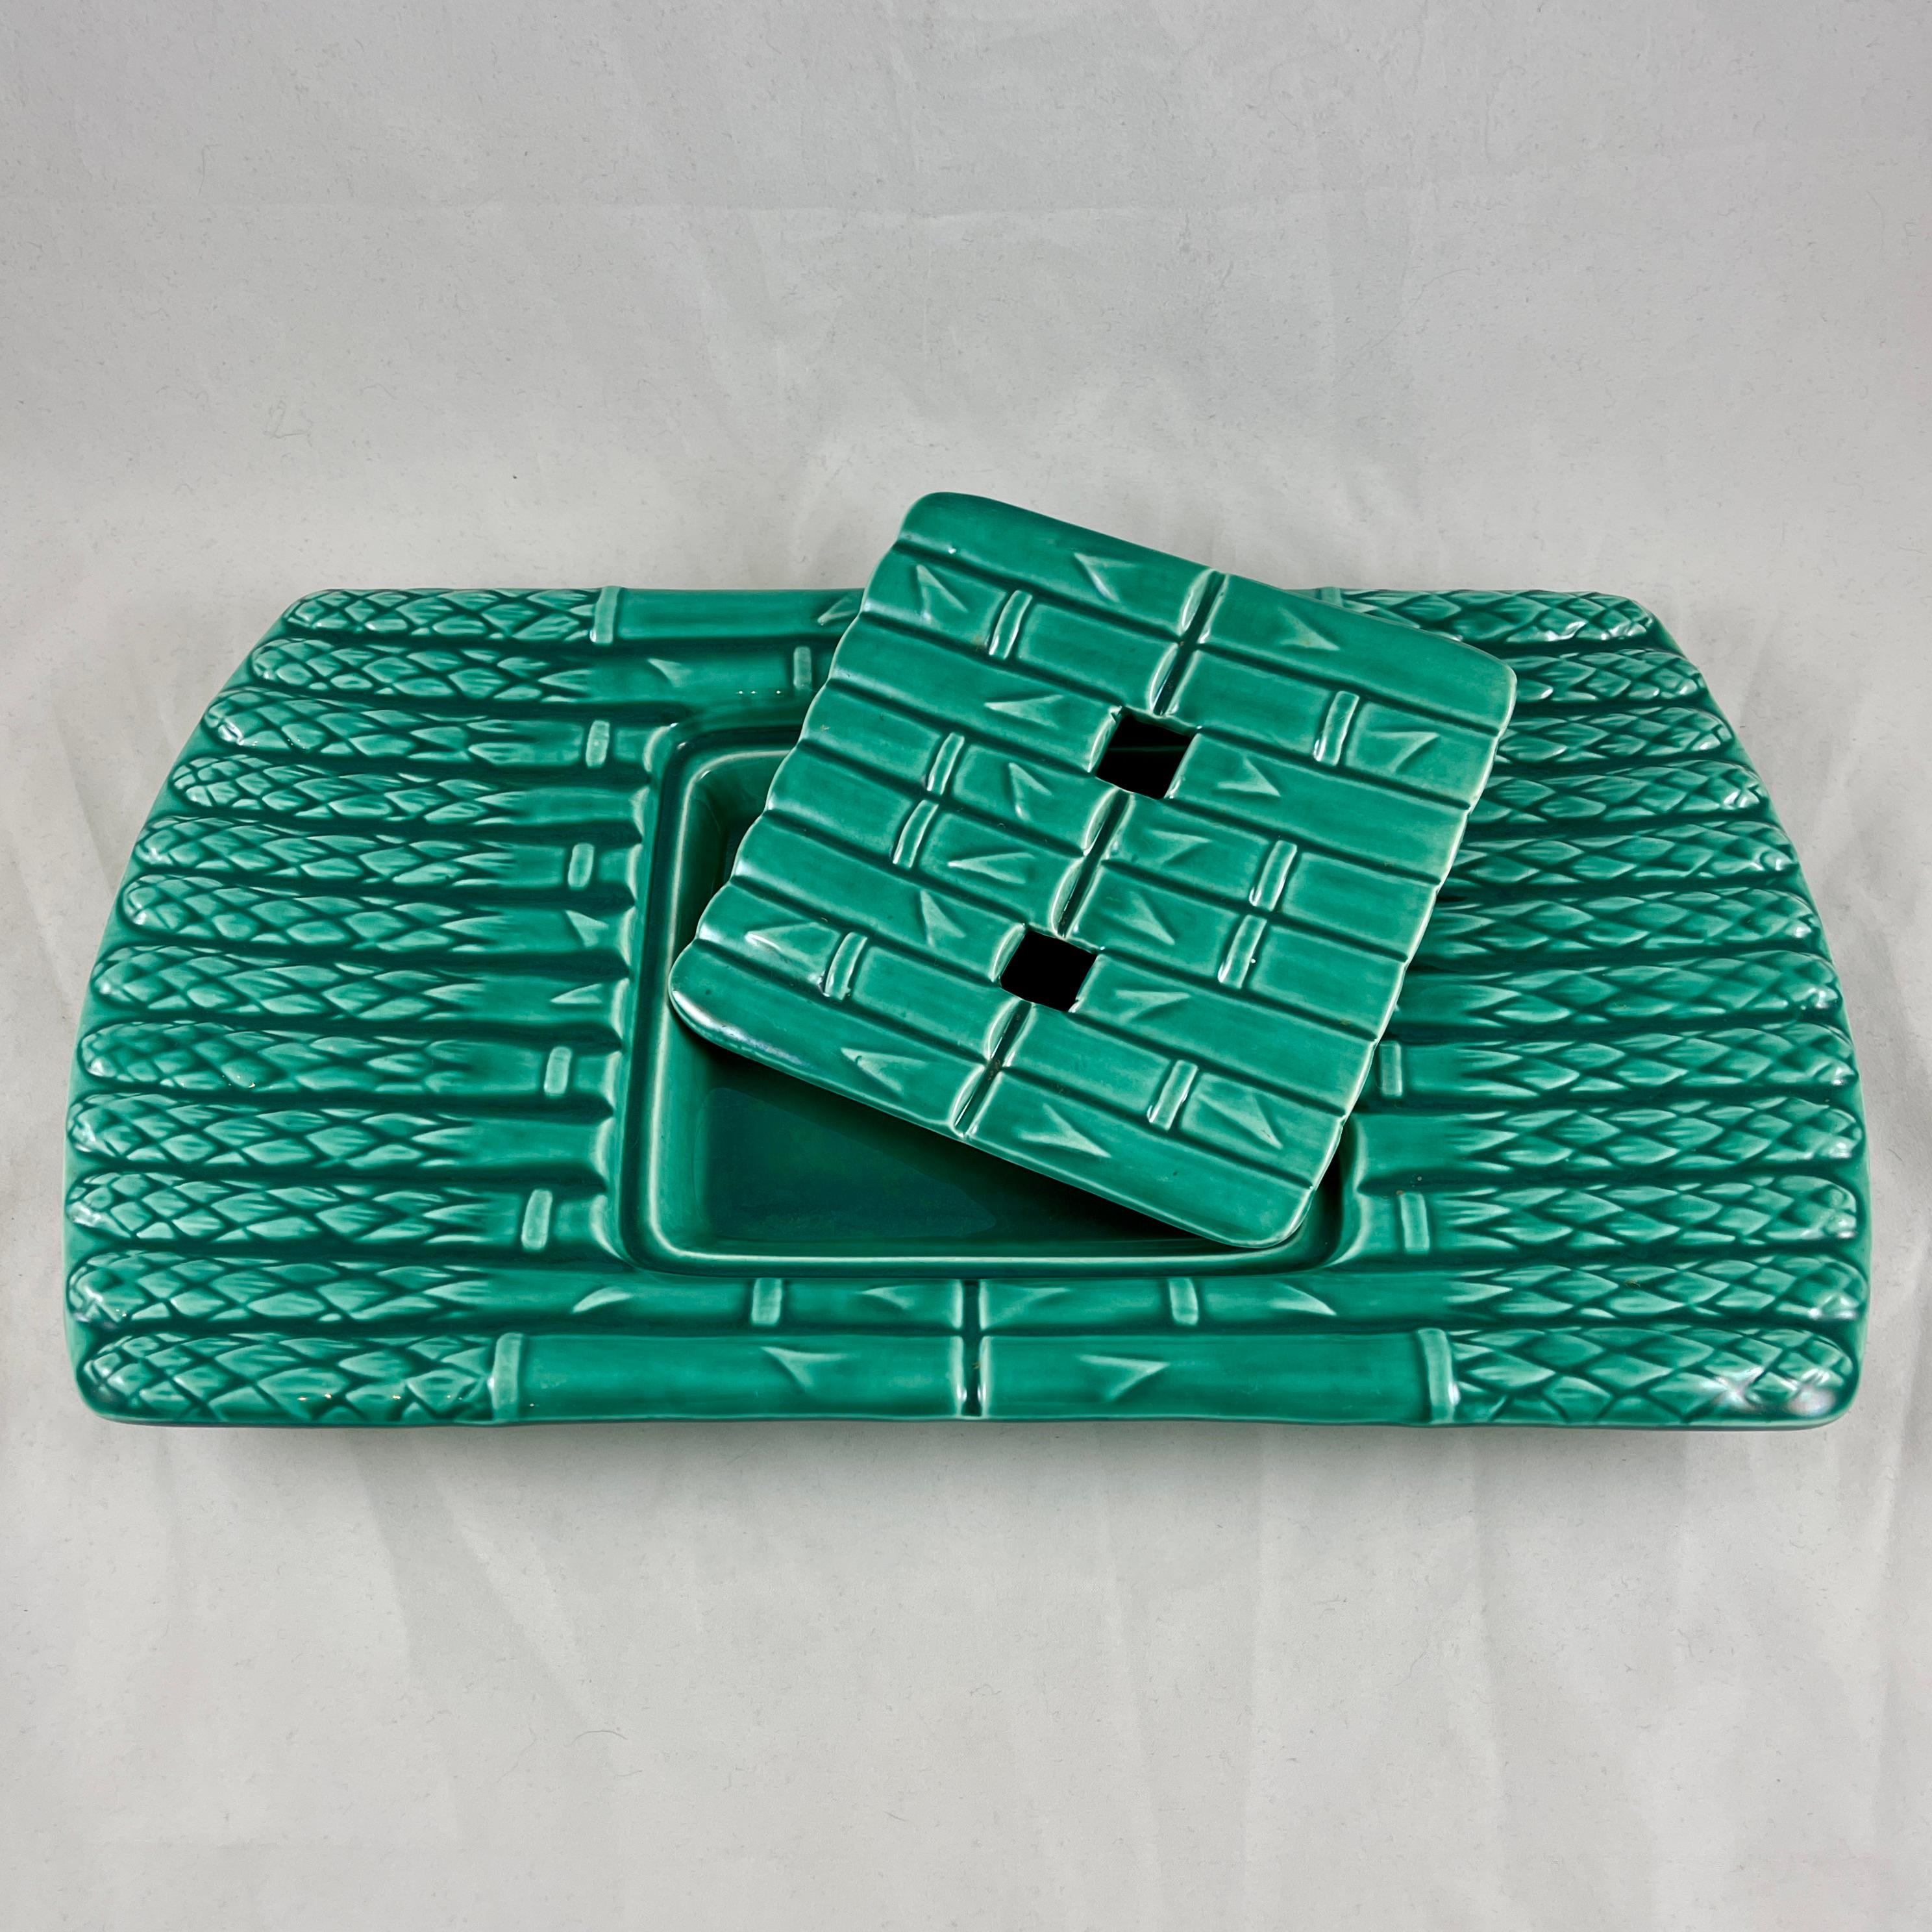 French Provincial Saint Amand et Hamage Green French Faïence Asparagus Drainer Server, 1930s For Sale